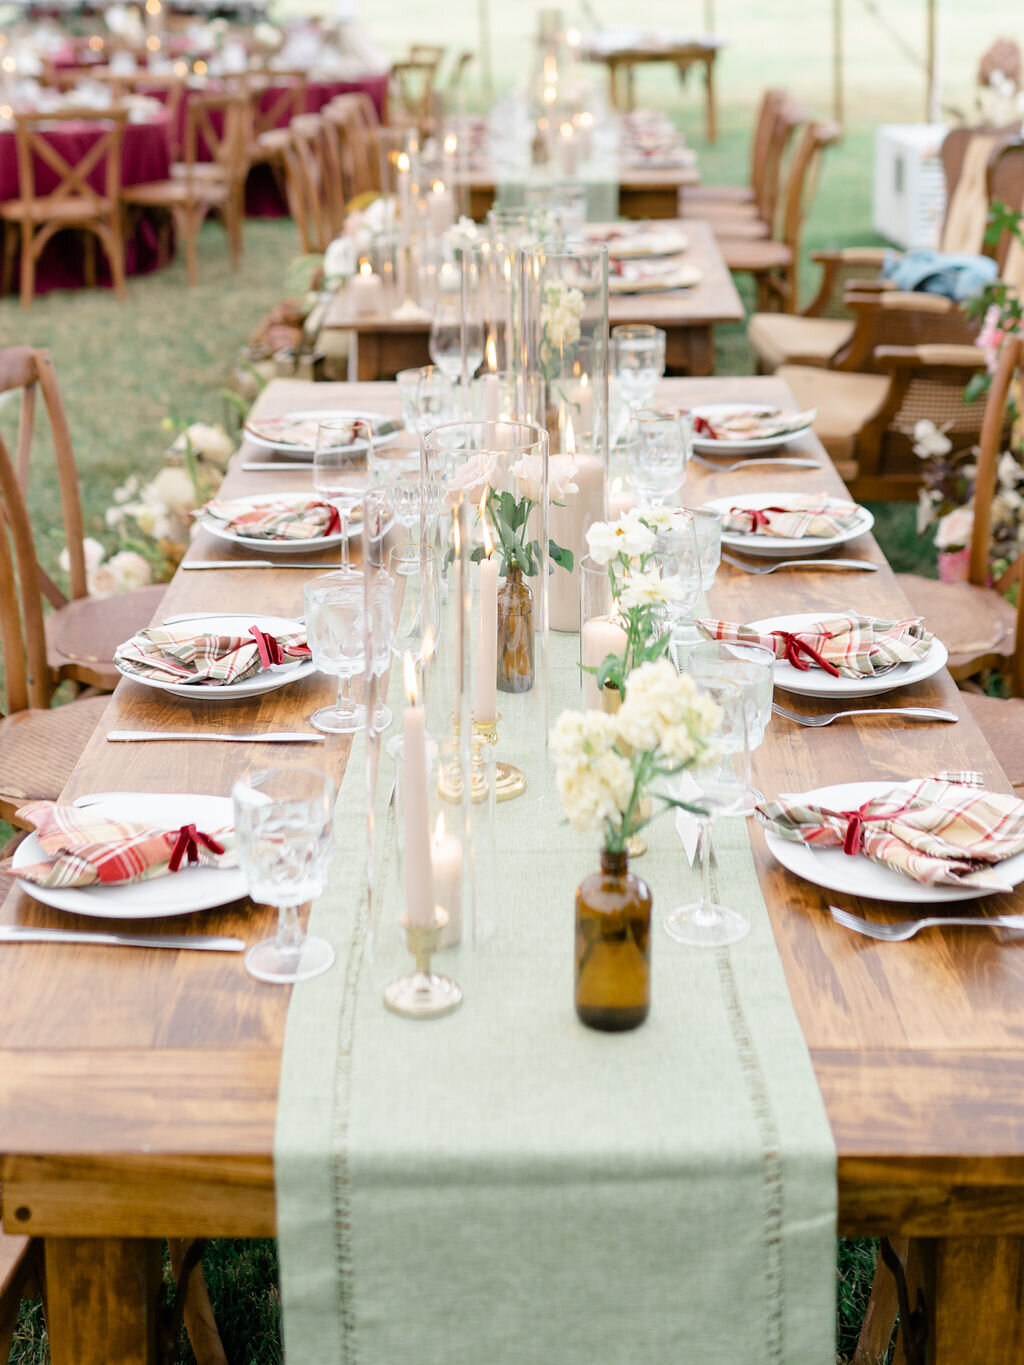 64_Kate Campbell Floral Autumnal Estate Wedding by Courtney Dueppengiesser photo